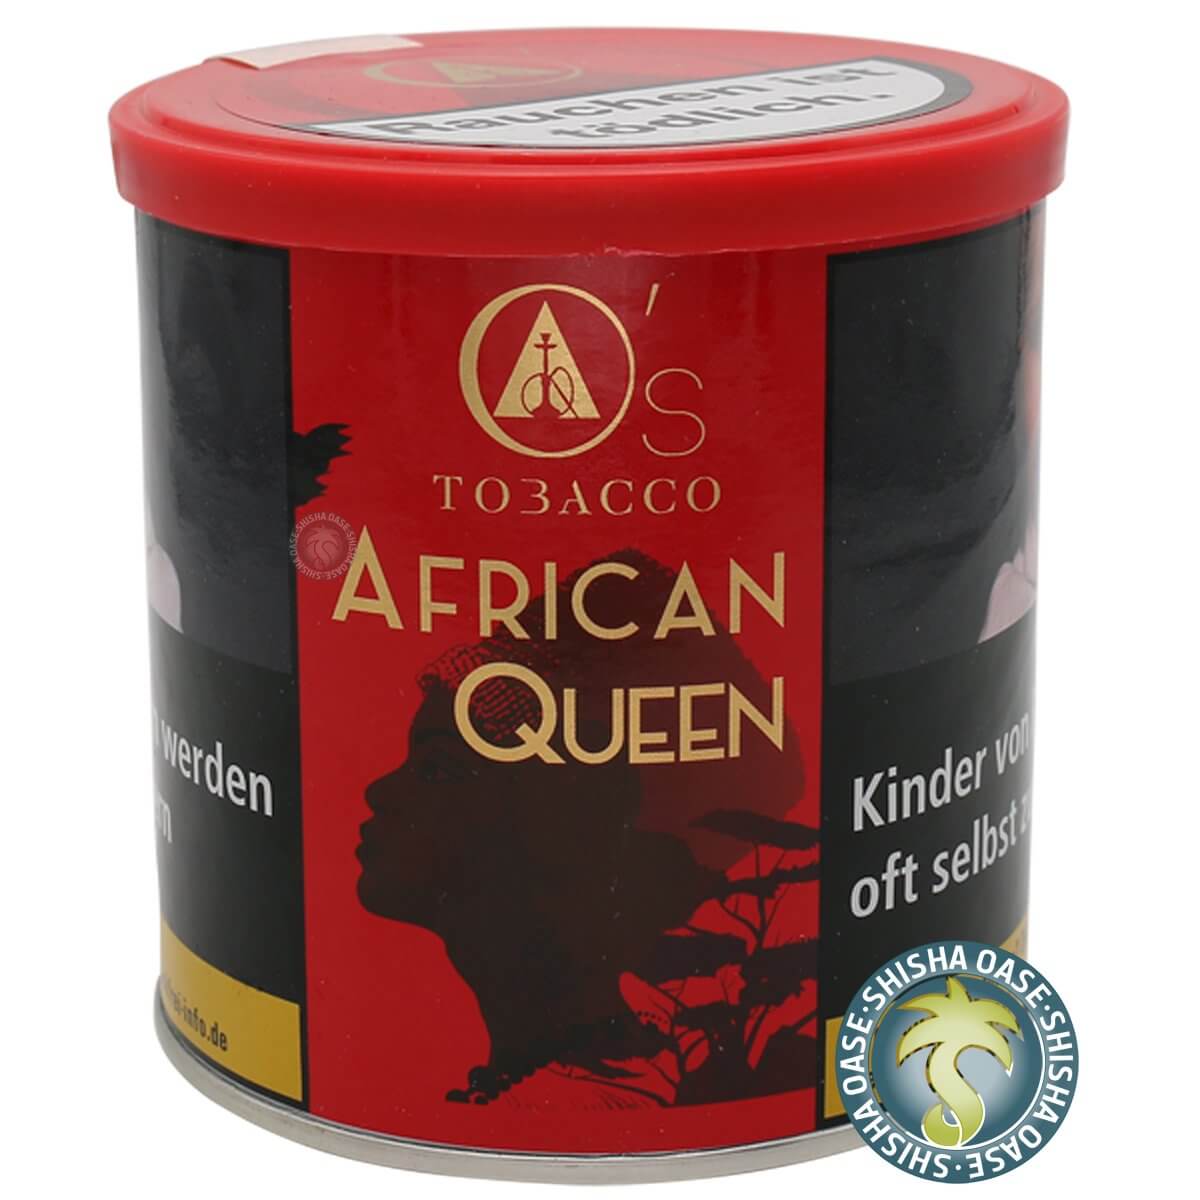 Os Tabak Red Line African Queen 200g